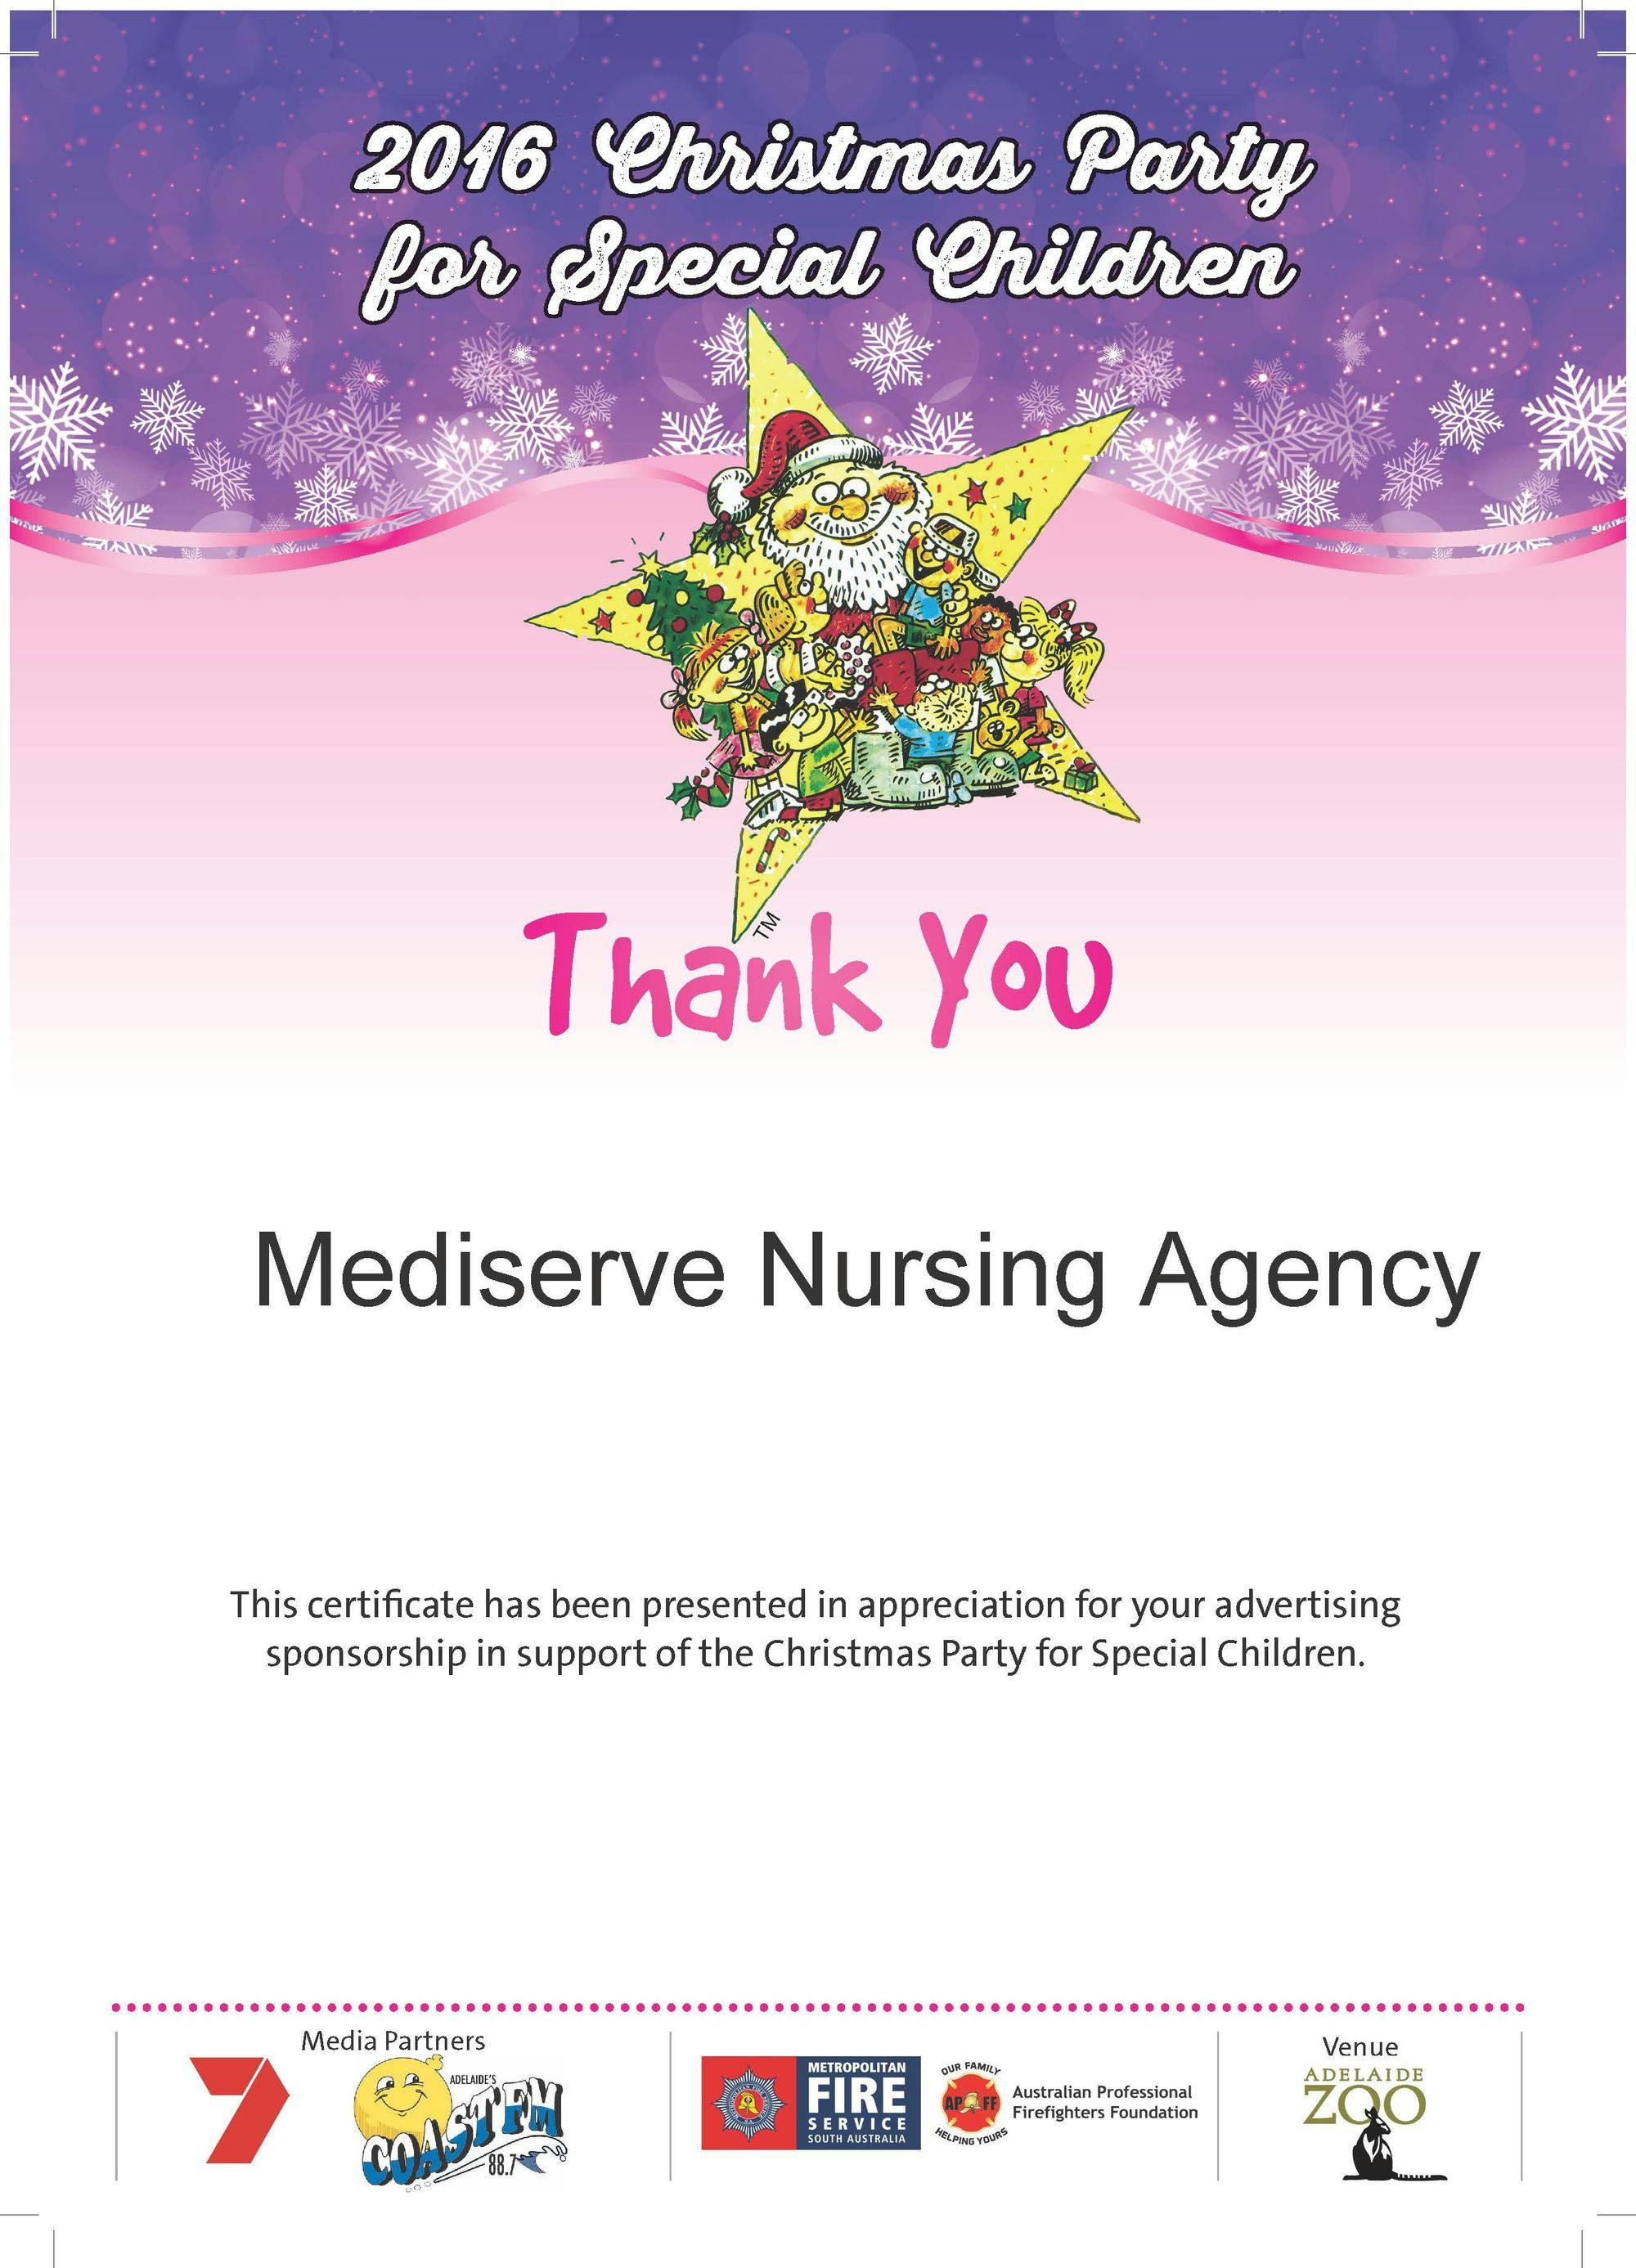 Mediserve donates to the Christmas Party for Children with special needs.